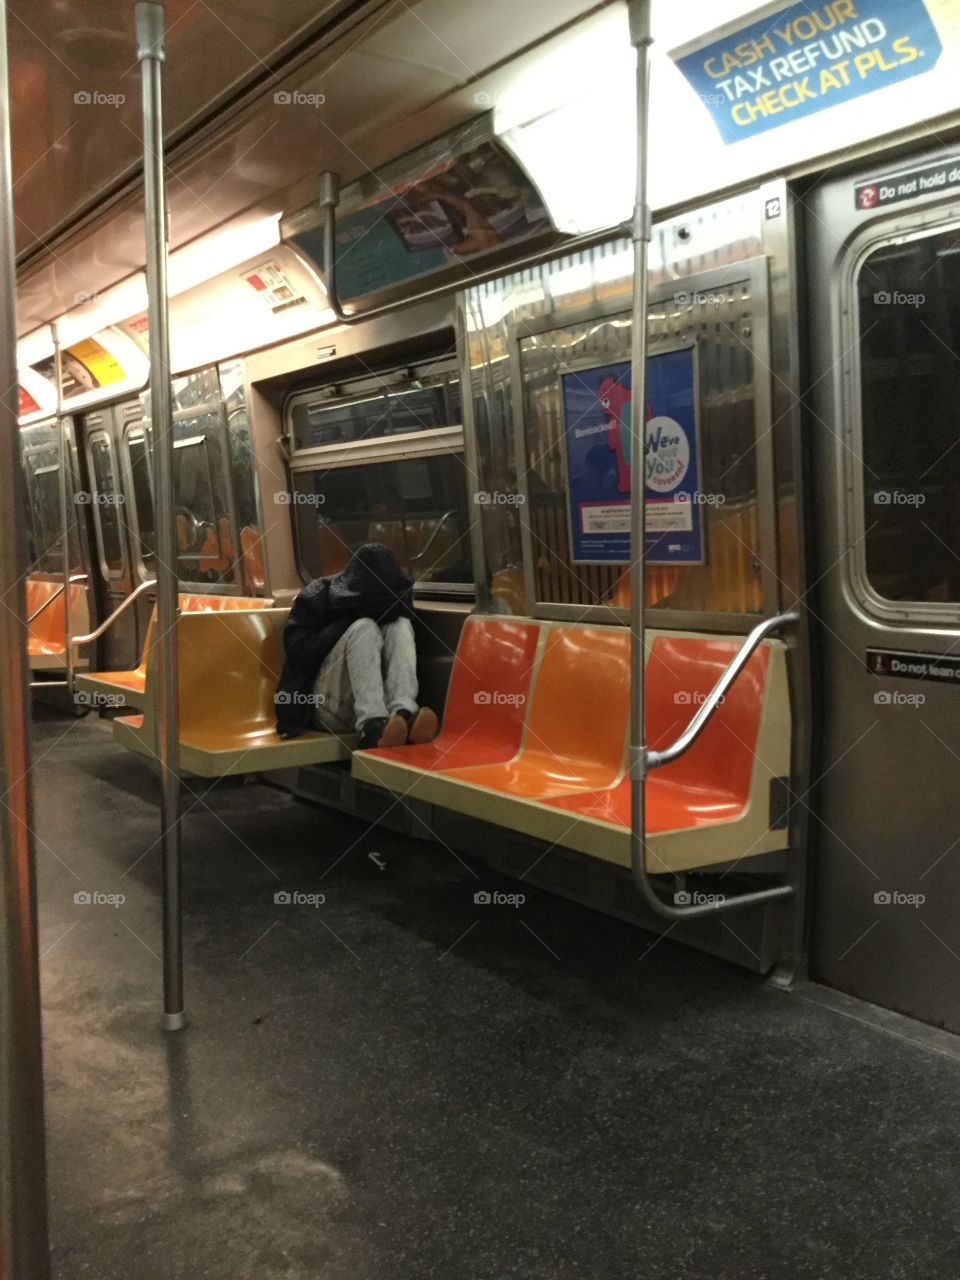 The lone  passenger, late at night on the G train.